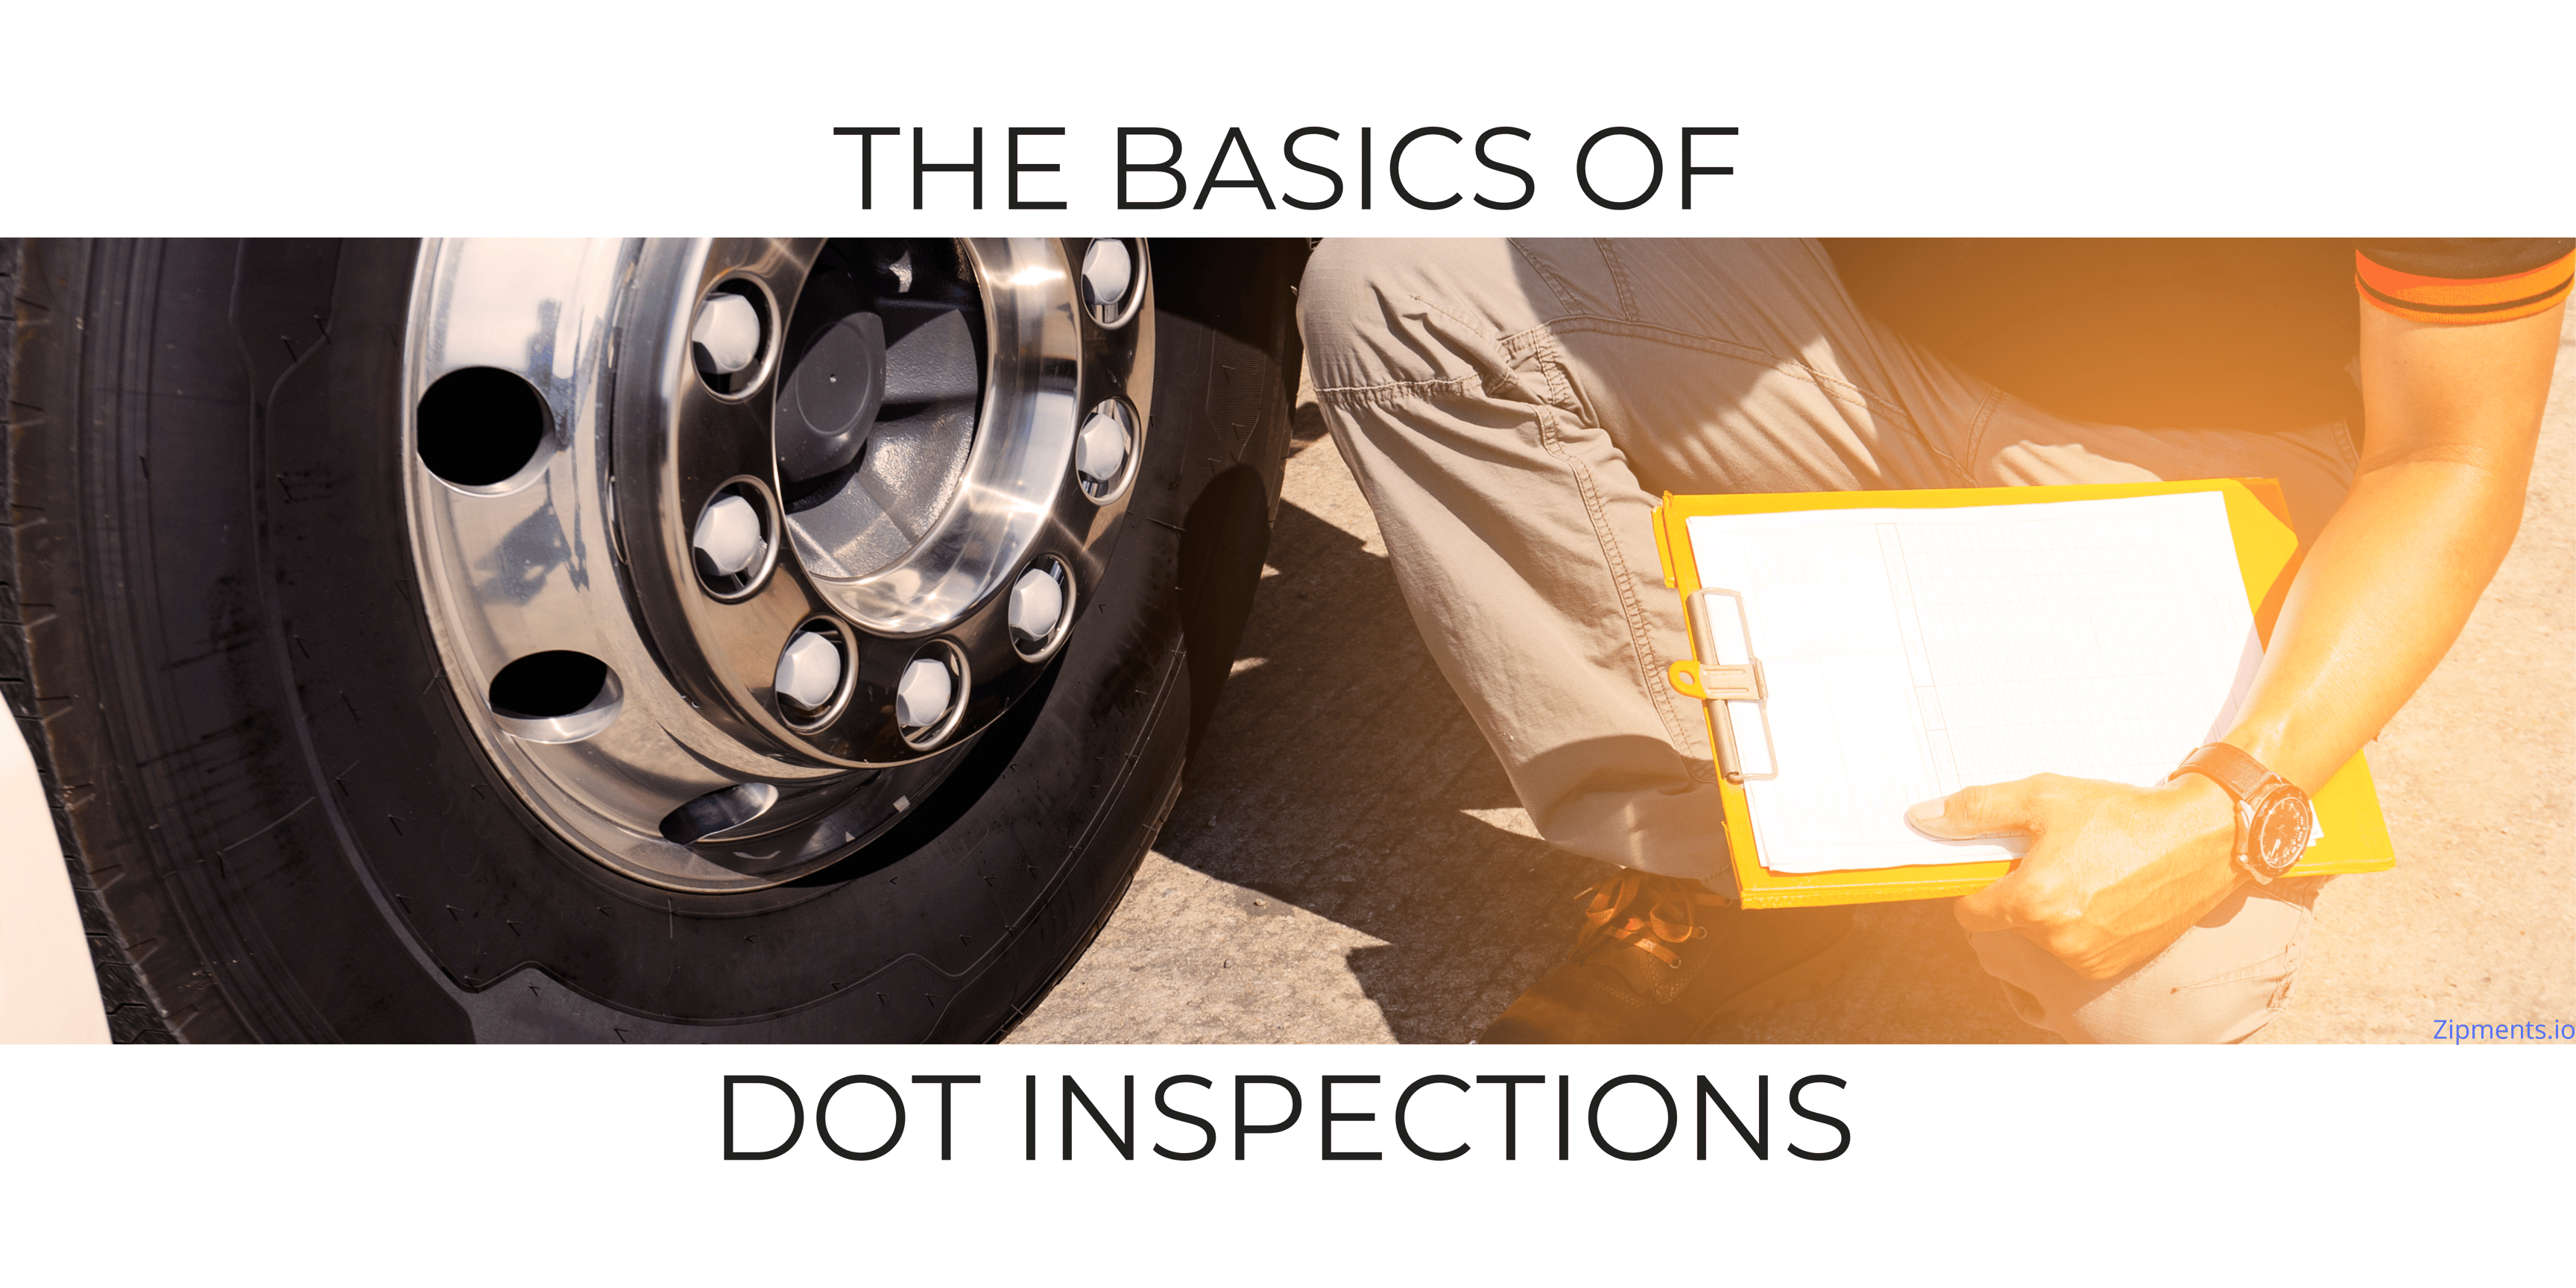 DOT Inspections The Process and How to Prepare